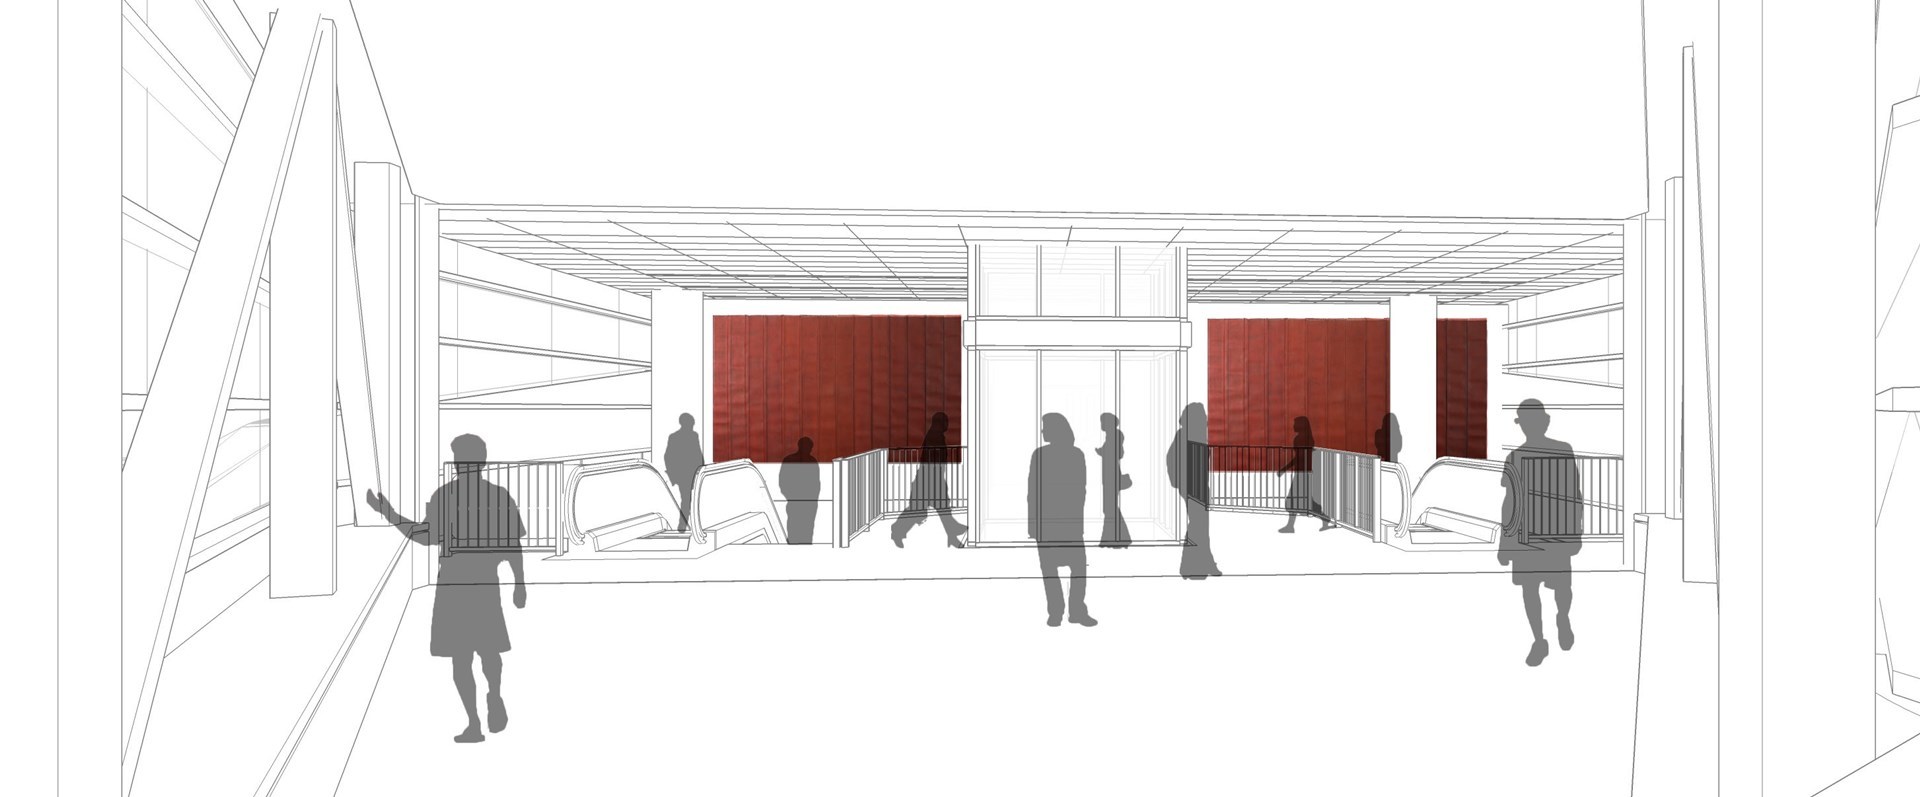 Artist Theaster Gates' conceptual rendering of america, america – the new public art planned for the south terminal building at the 95th Street Red Line station.